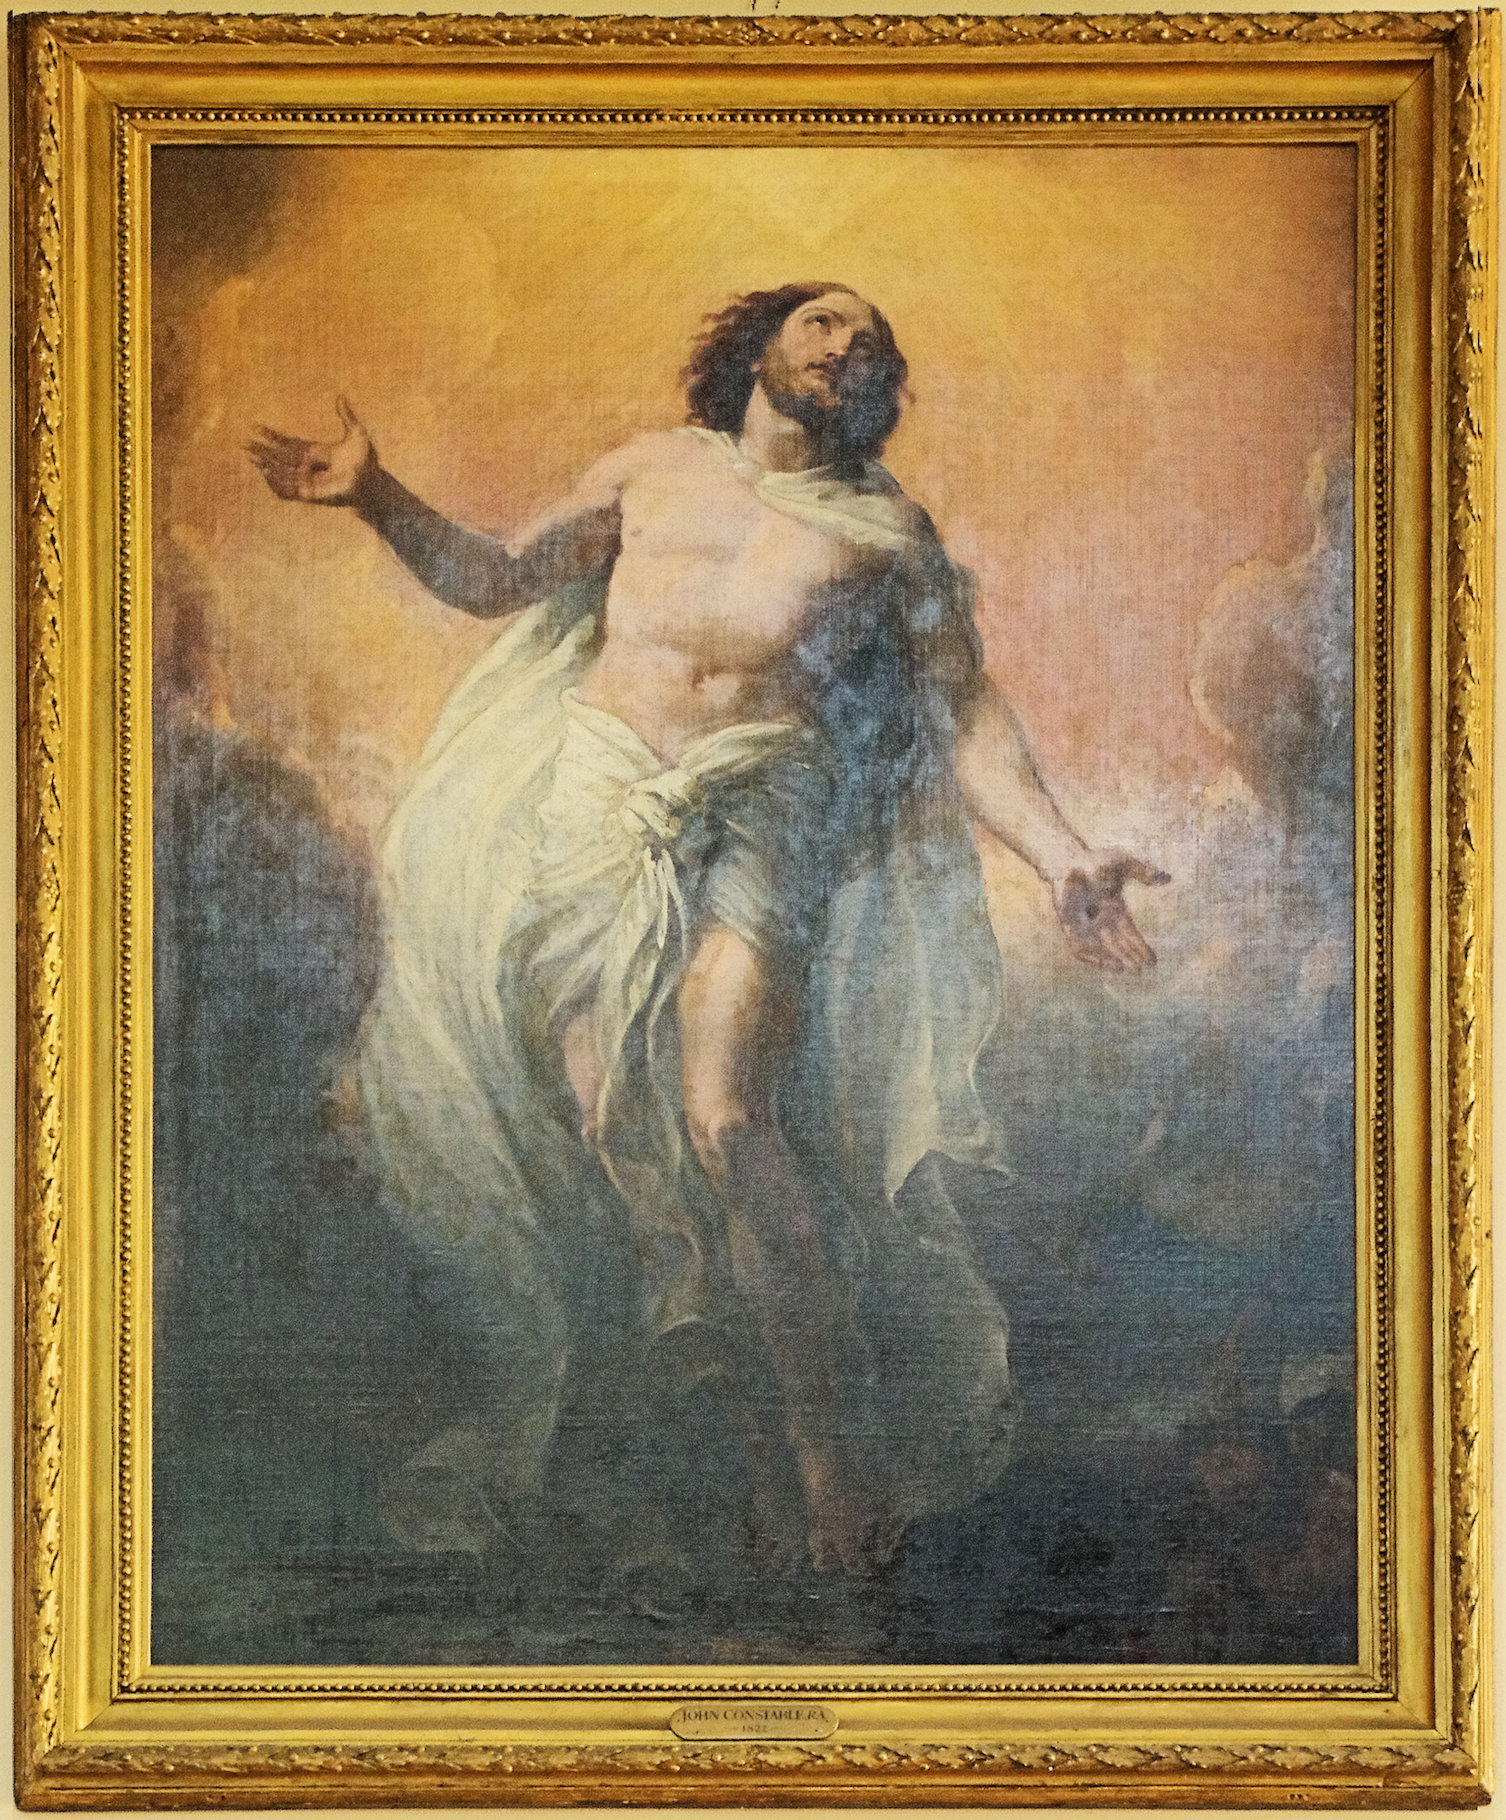 The Ascension (1822) by John Constable (25/05/2014.). The best piece among three religious paintings painted by the Romantic painter. This painting, which had a somewhat chequered career from the very beginning, exists in the St. Mary’s Church, Dedham, Essex, England, since 2001 AD. (25/05/2014.).